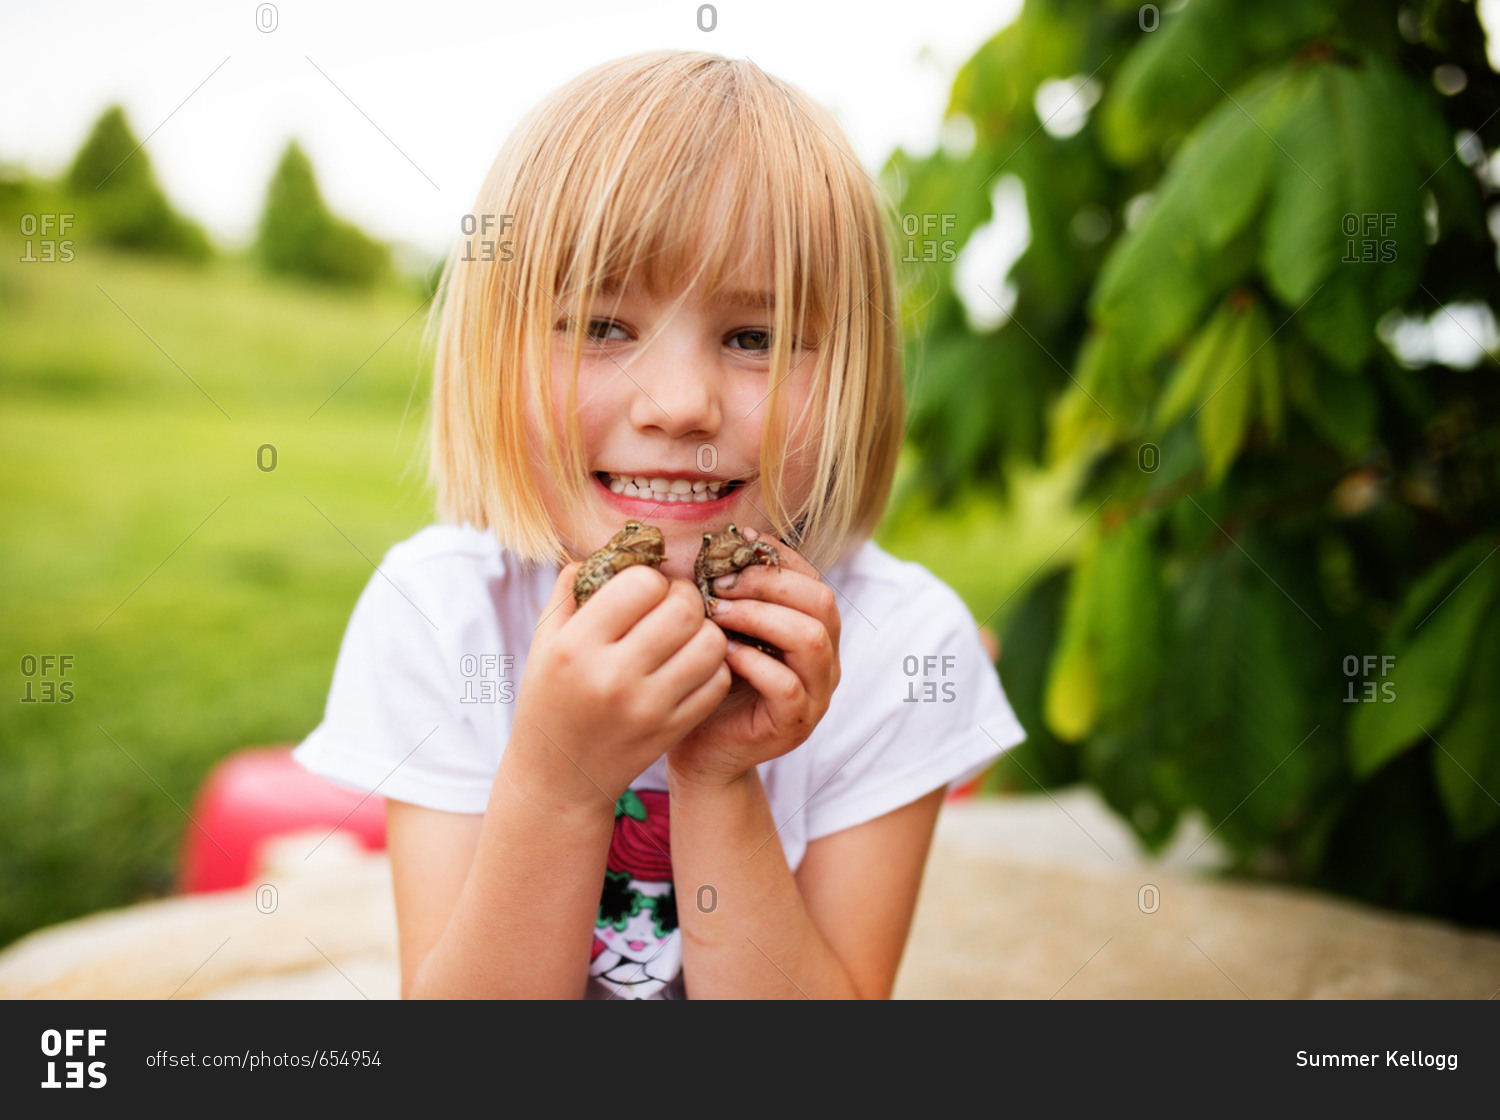 Girl holding toads